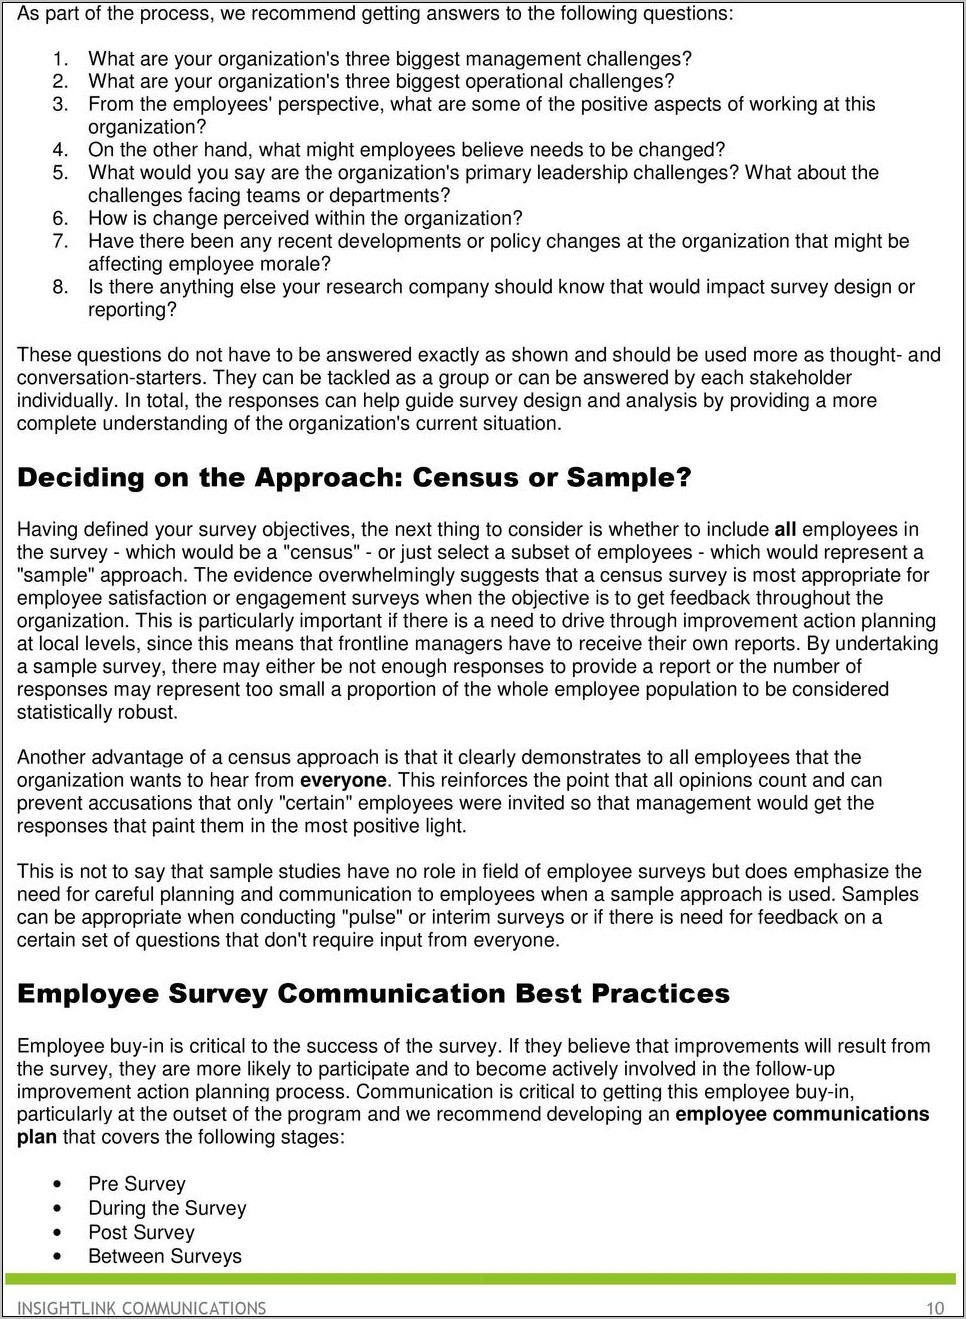 Sample Answers To Employee Survey Questions